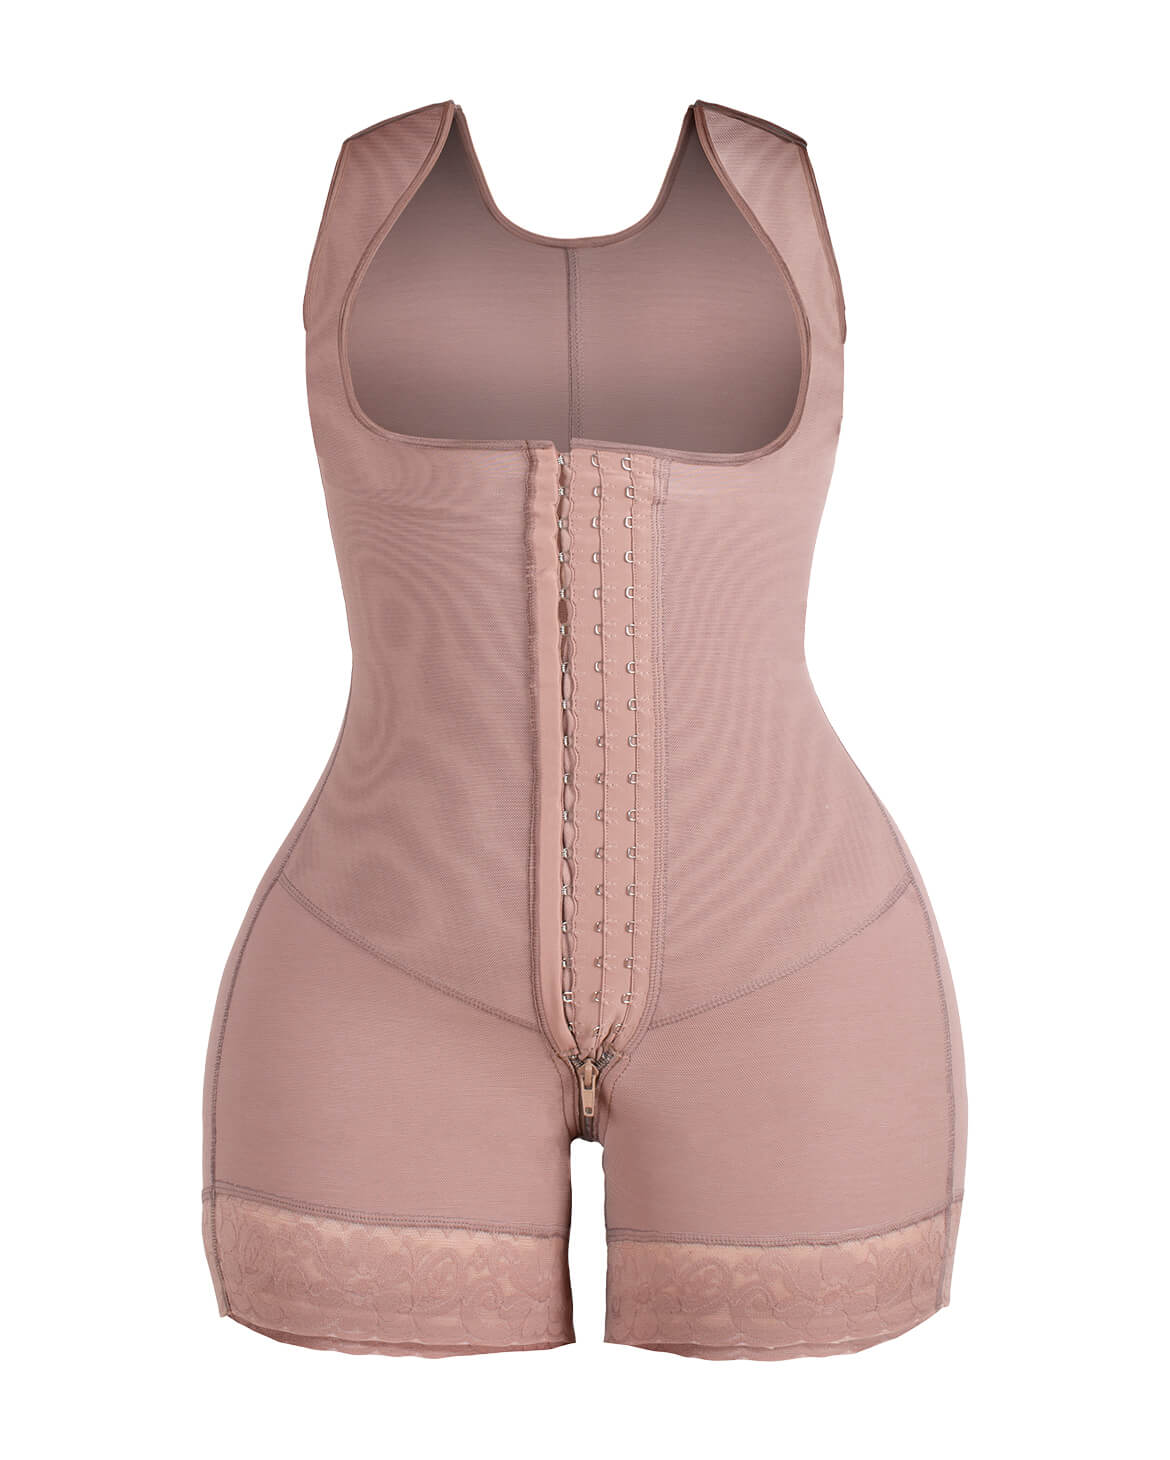 SpanPro By Bellefit  Recovery Girdles Corsets & Leggings